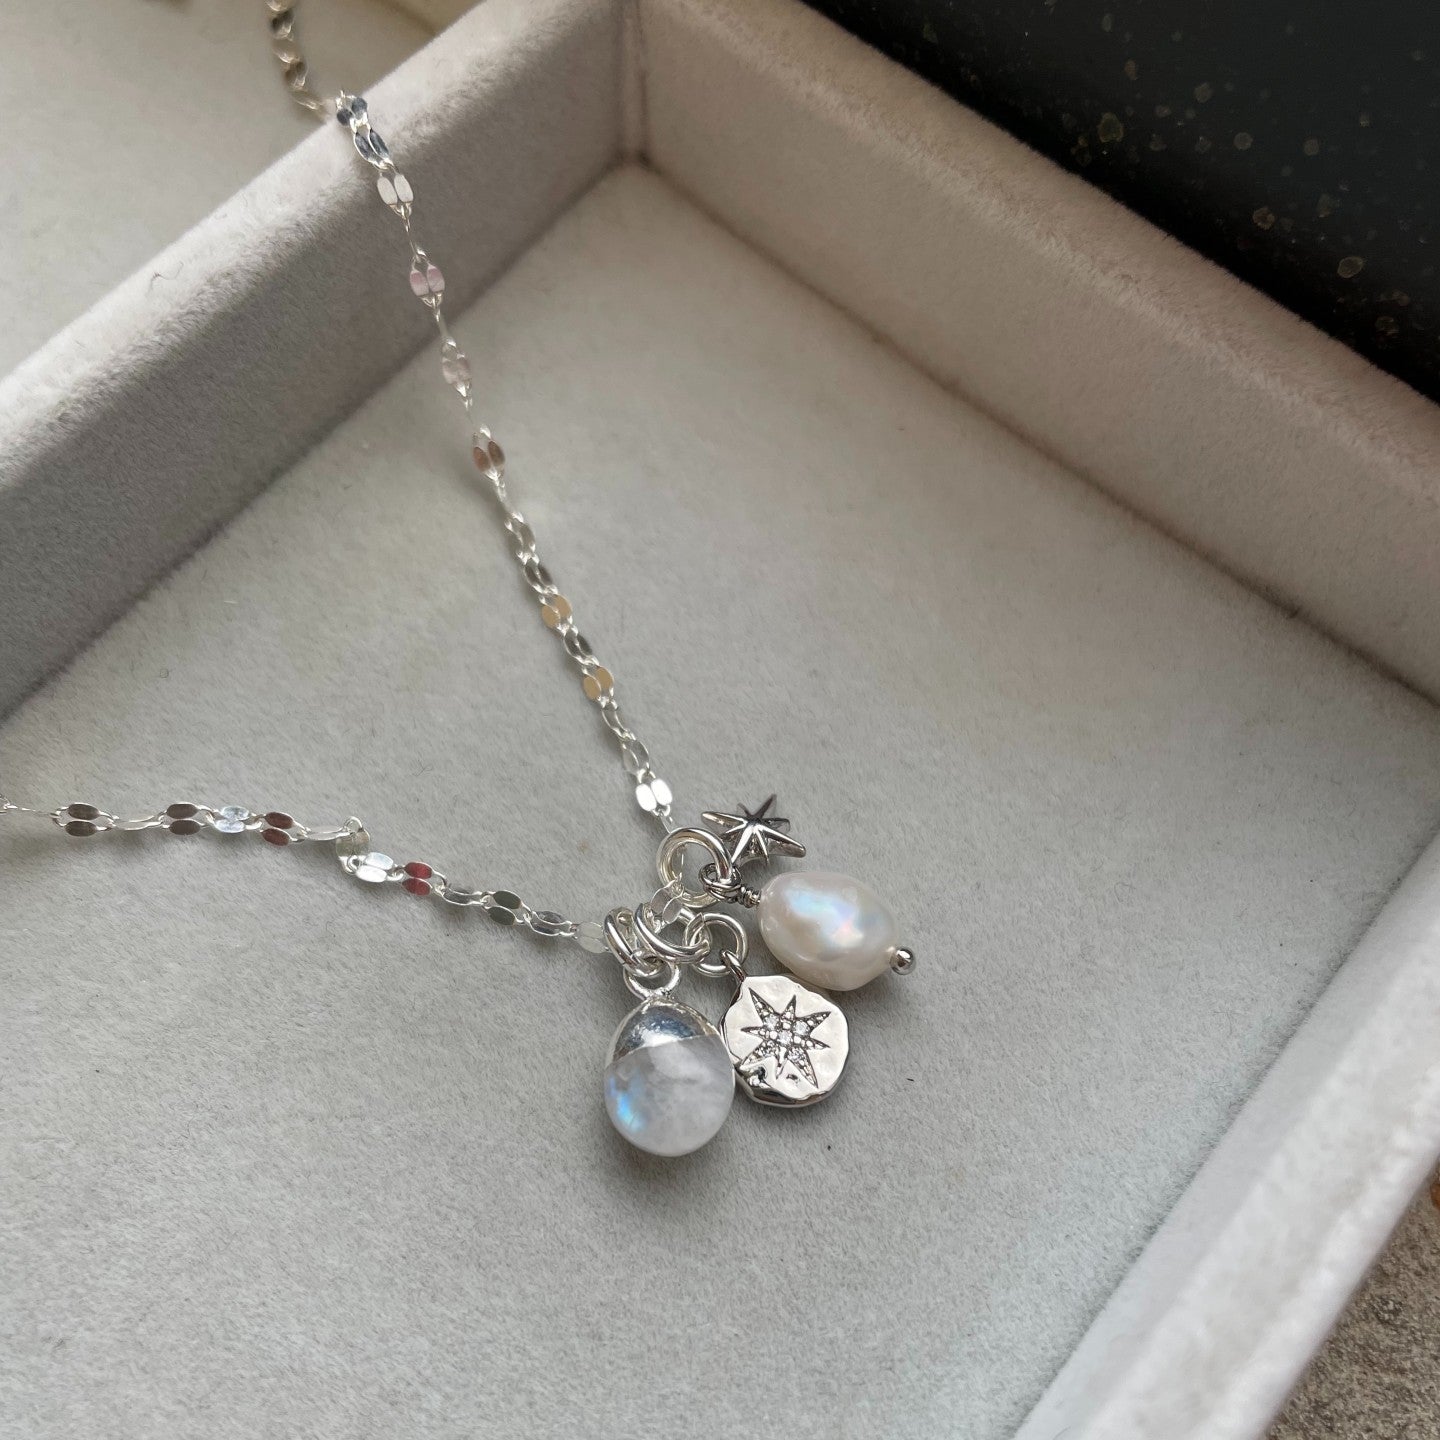 Moonstone Charm Necklace | Intuition (Silver)